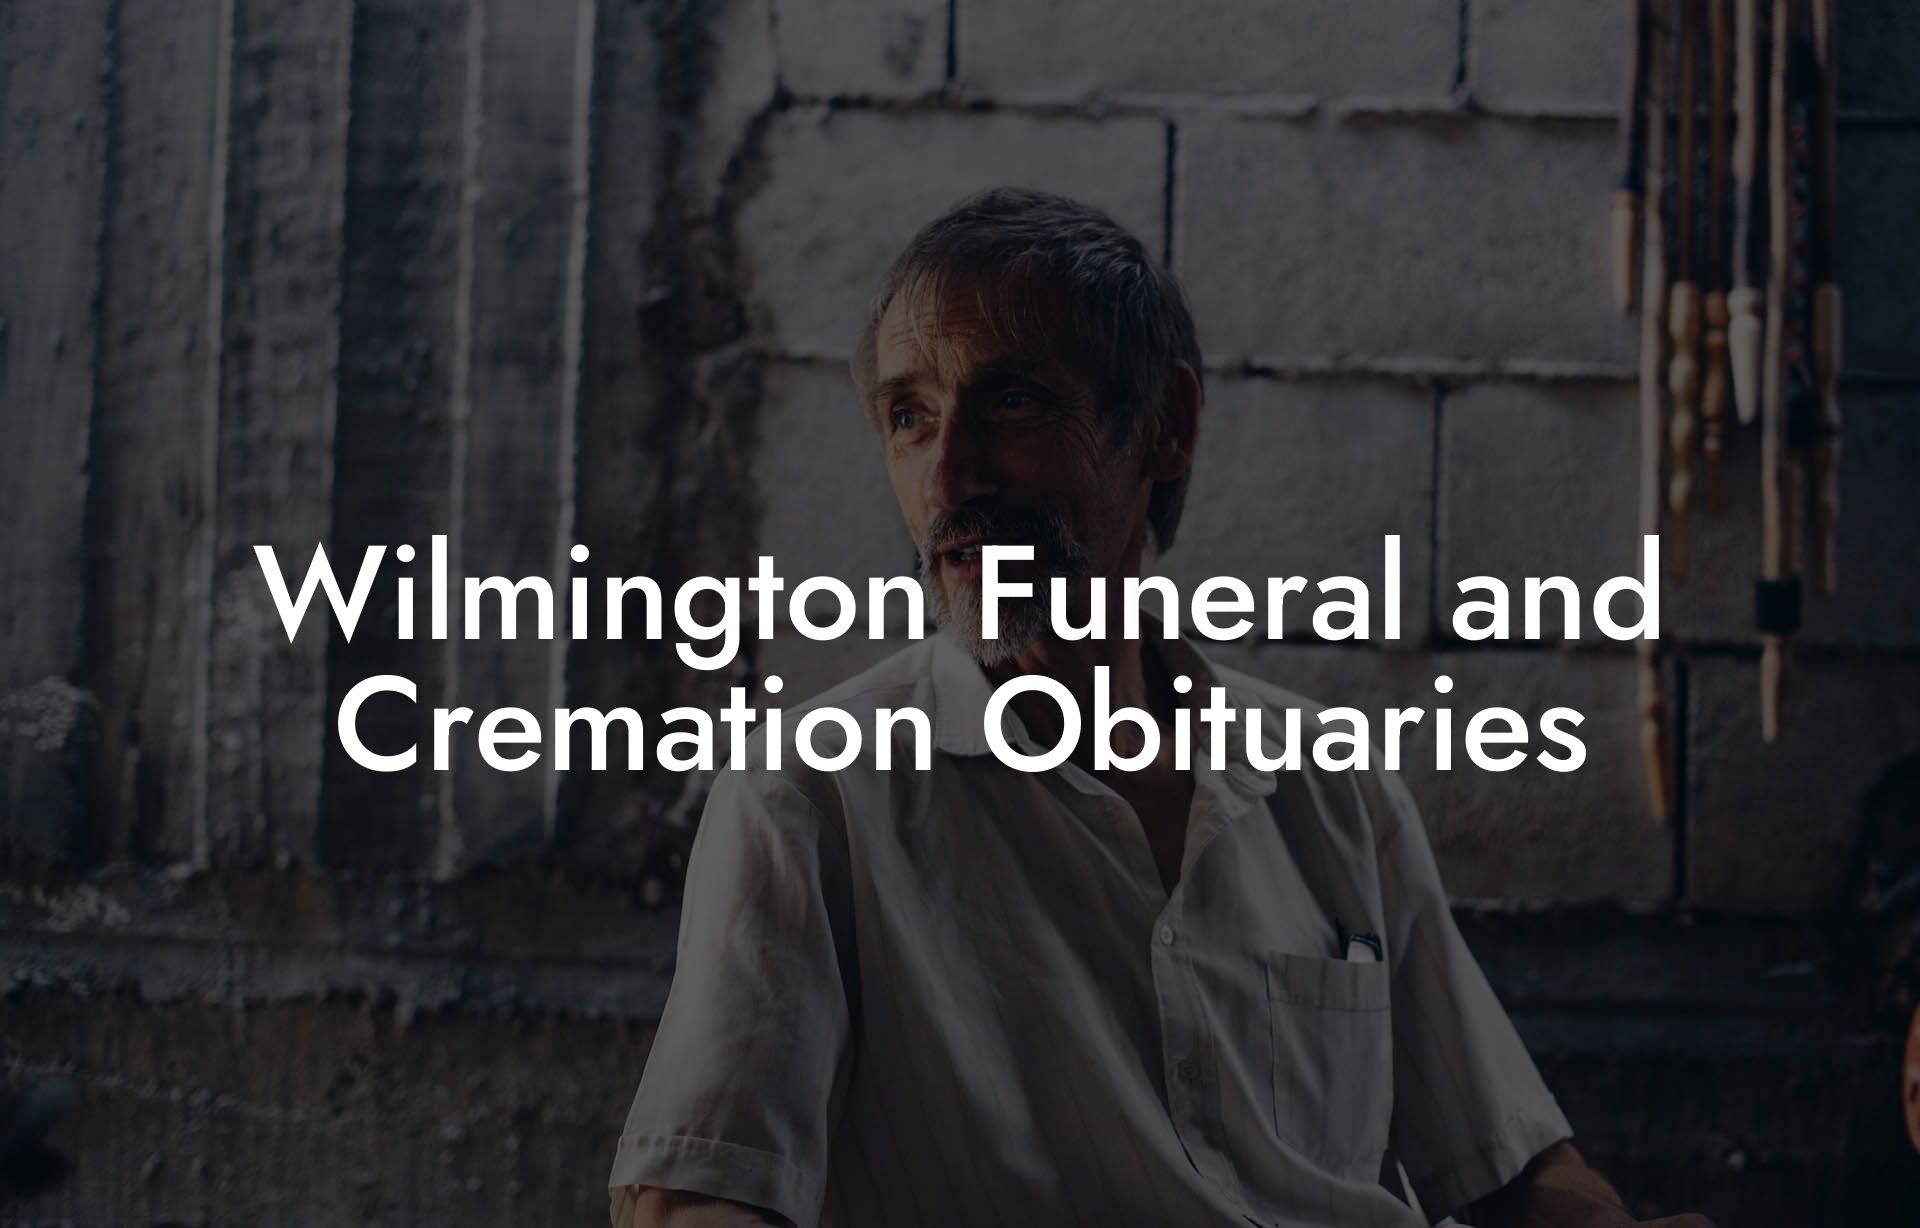 Wilmington Funeral and Cremation Obituaries